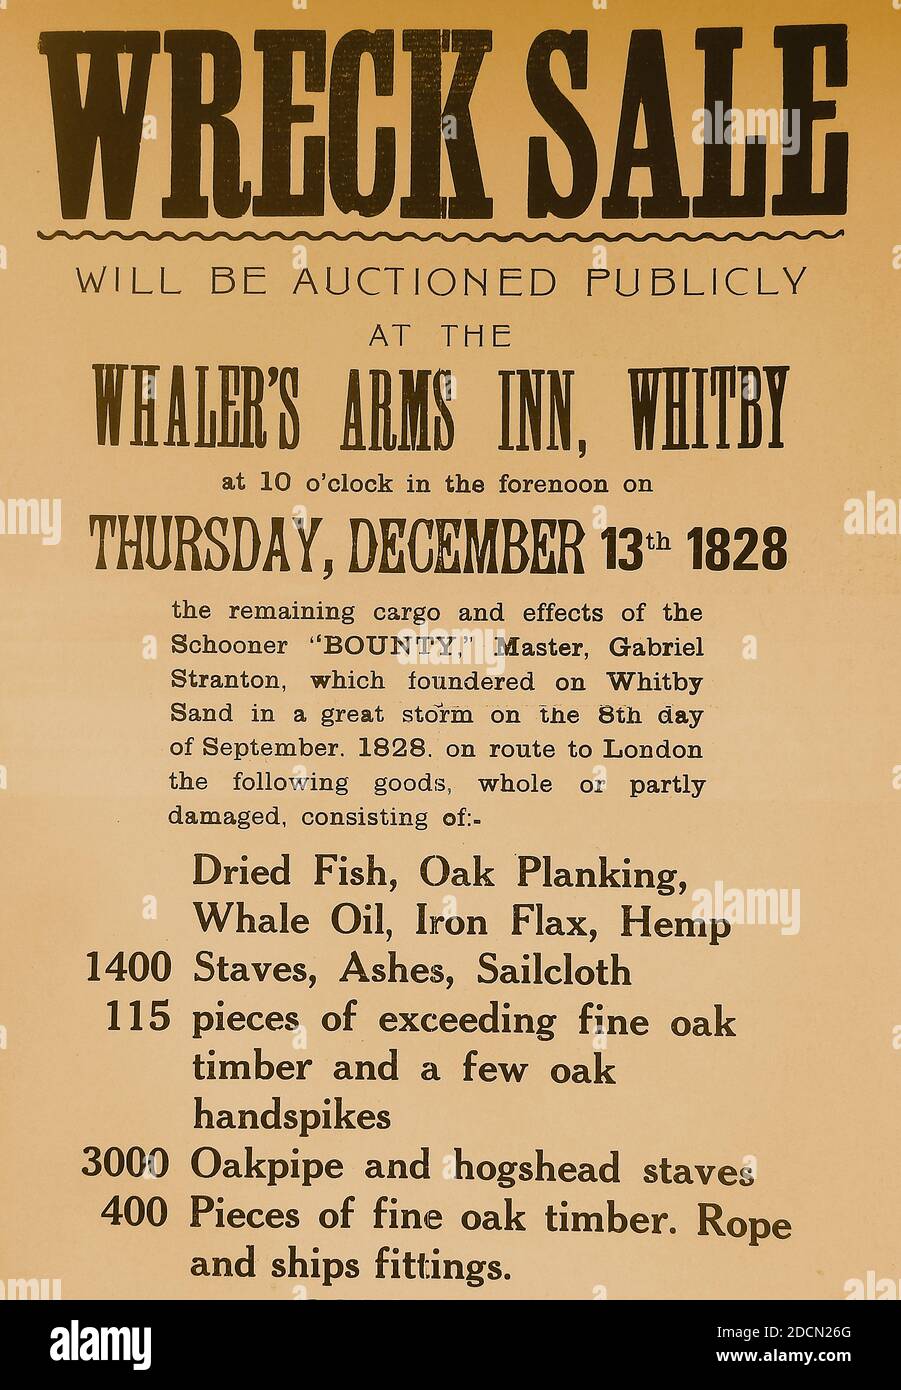 A typical example of what a Victorian wreck sale poster would look like. It was common in Victorian times that wrecked ships and their cargoes were put up for sale, sometimes as early as the next day. This poster shows typically  what would be put up for auction. Stock Photo